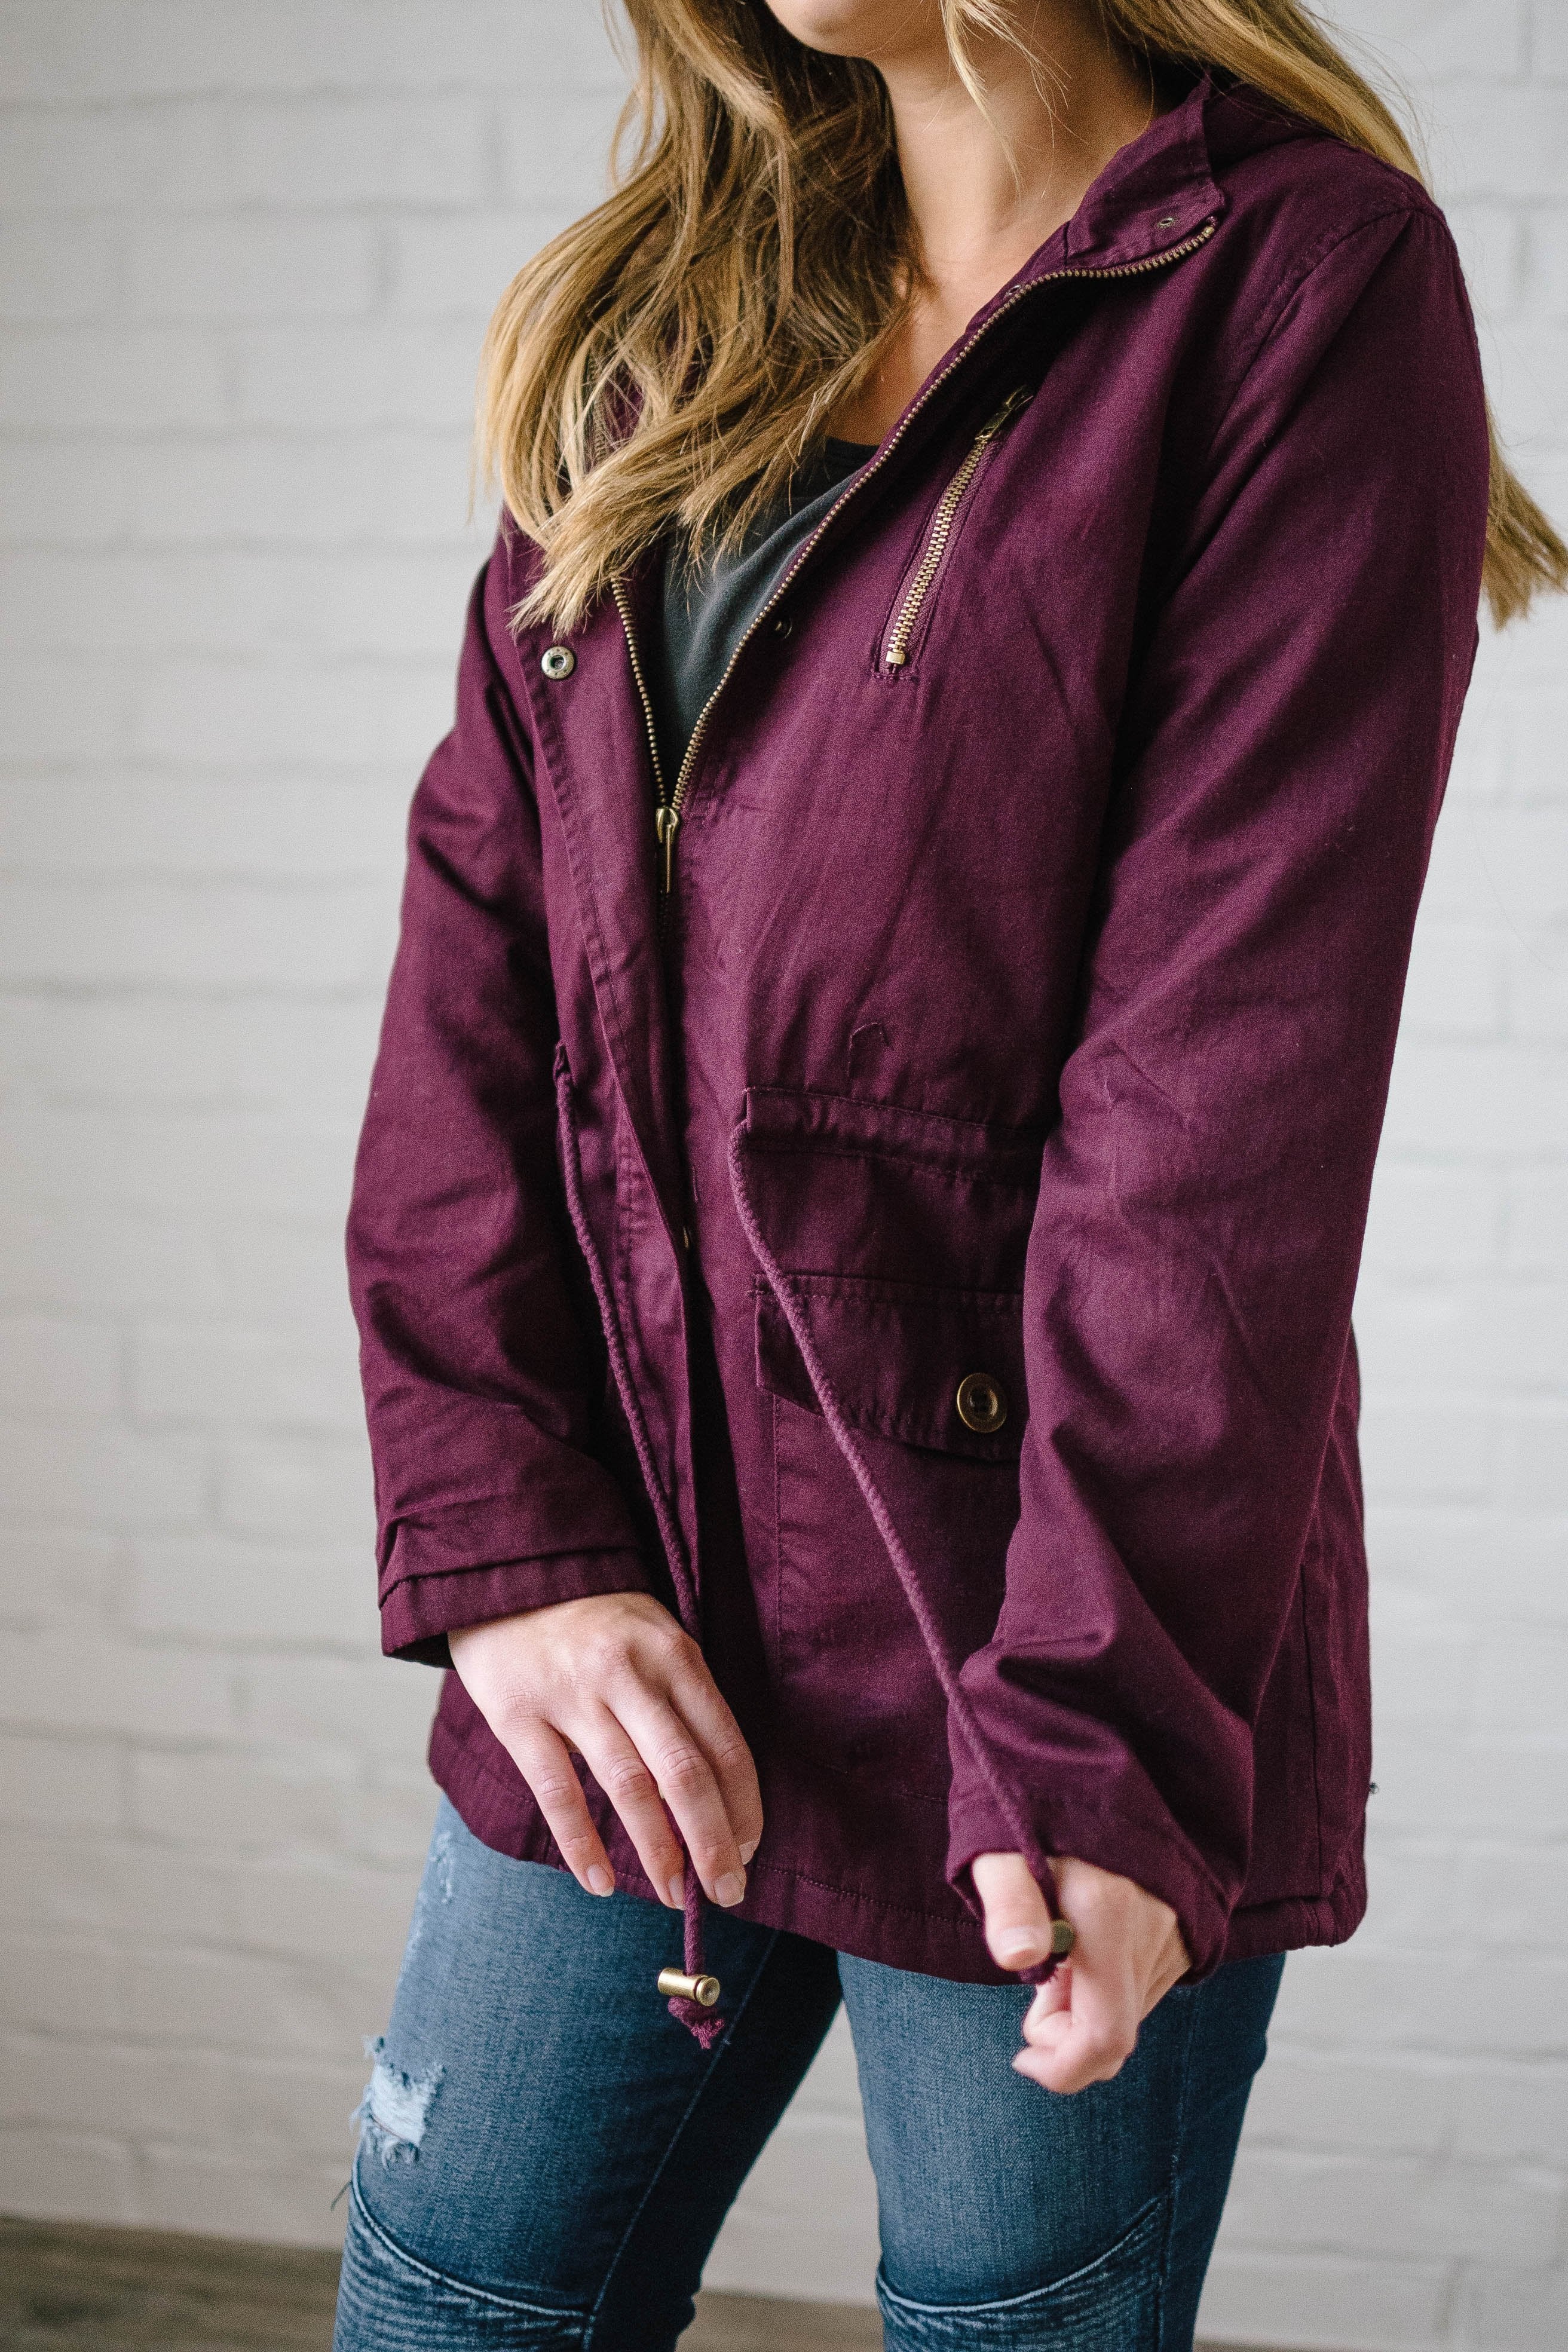 Scouting It Out Fur Lined Jacket in Burgundy